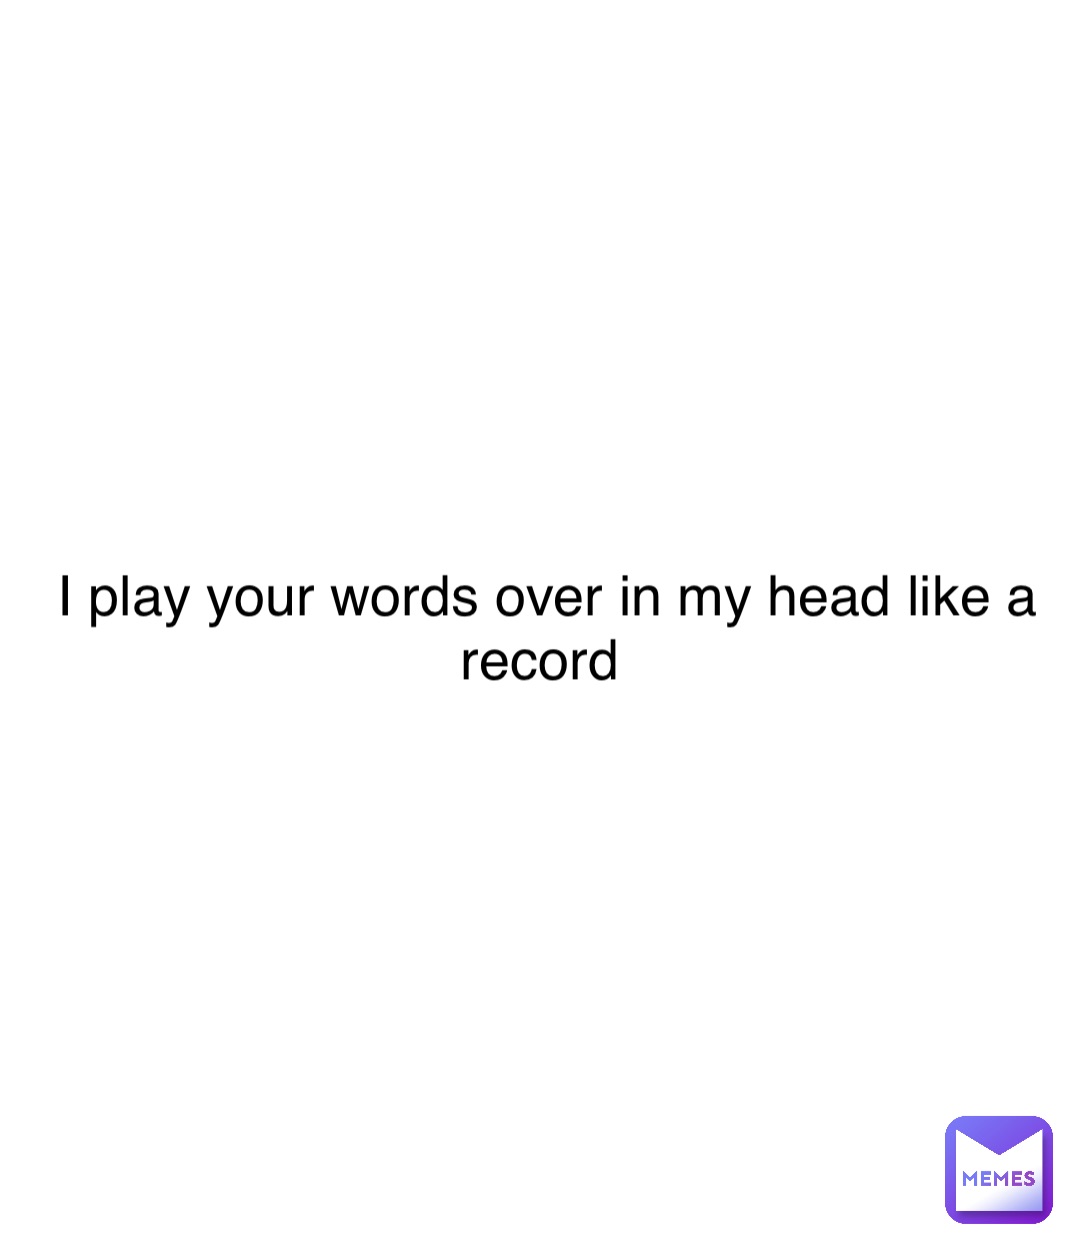 Double tap to edit I play your words over in my head like a record